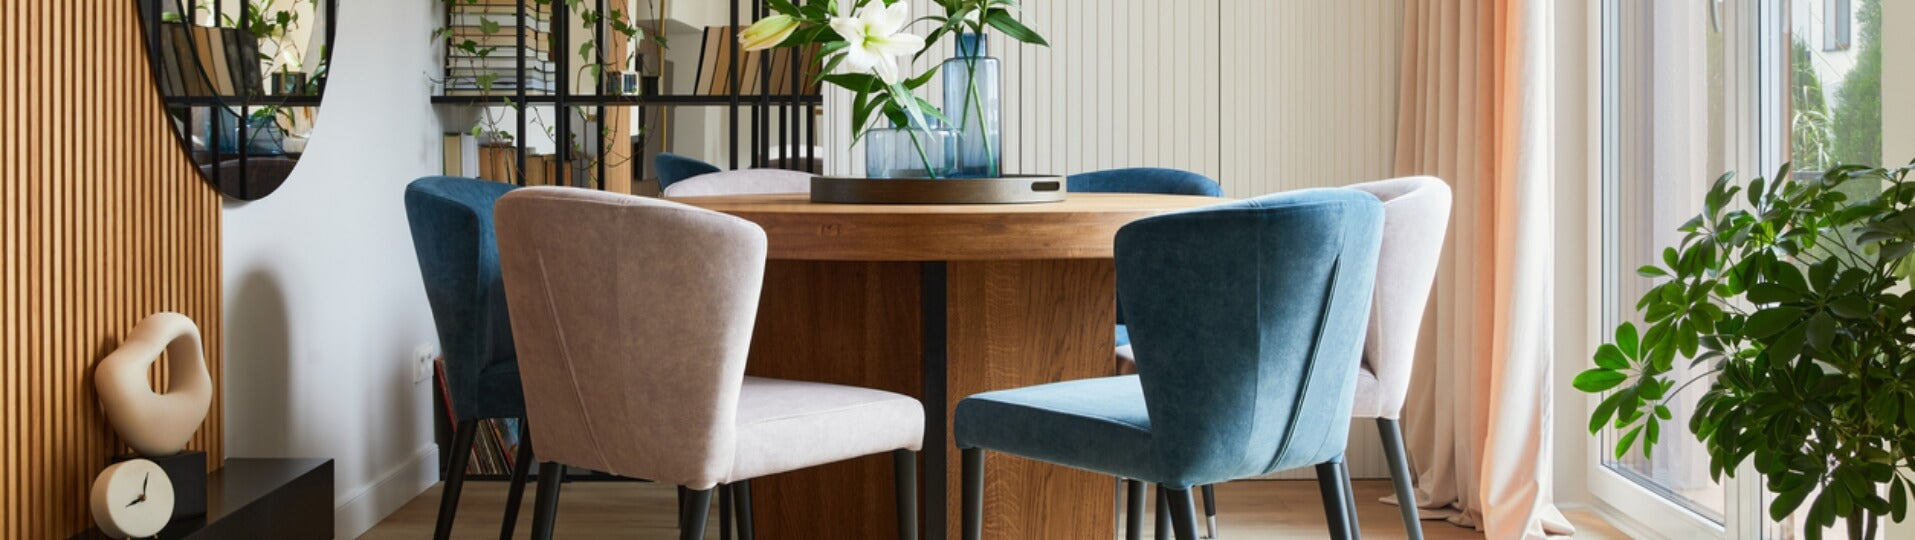 Top 8 Affordable Quality Furniture Brands: A Buyer's Guide